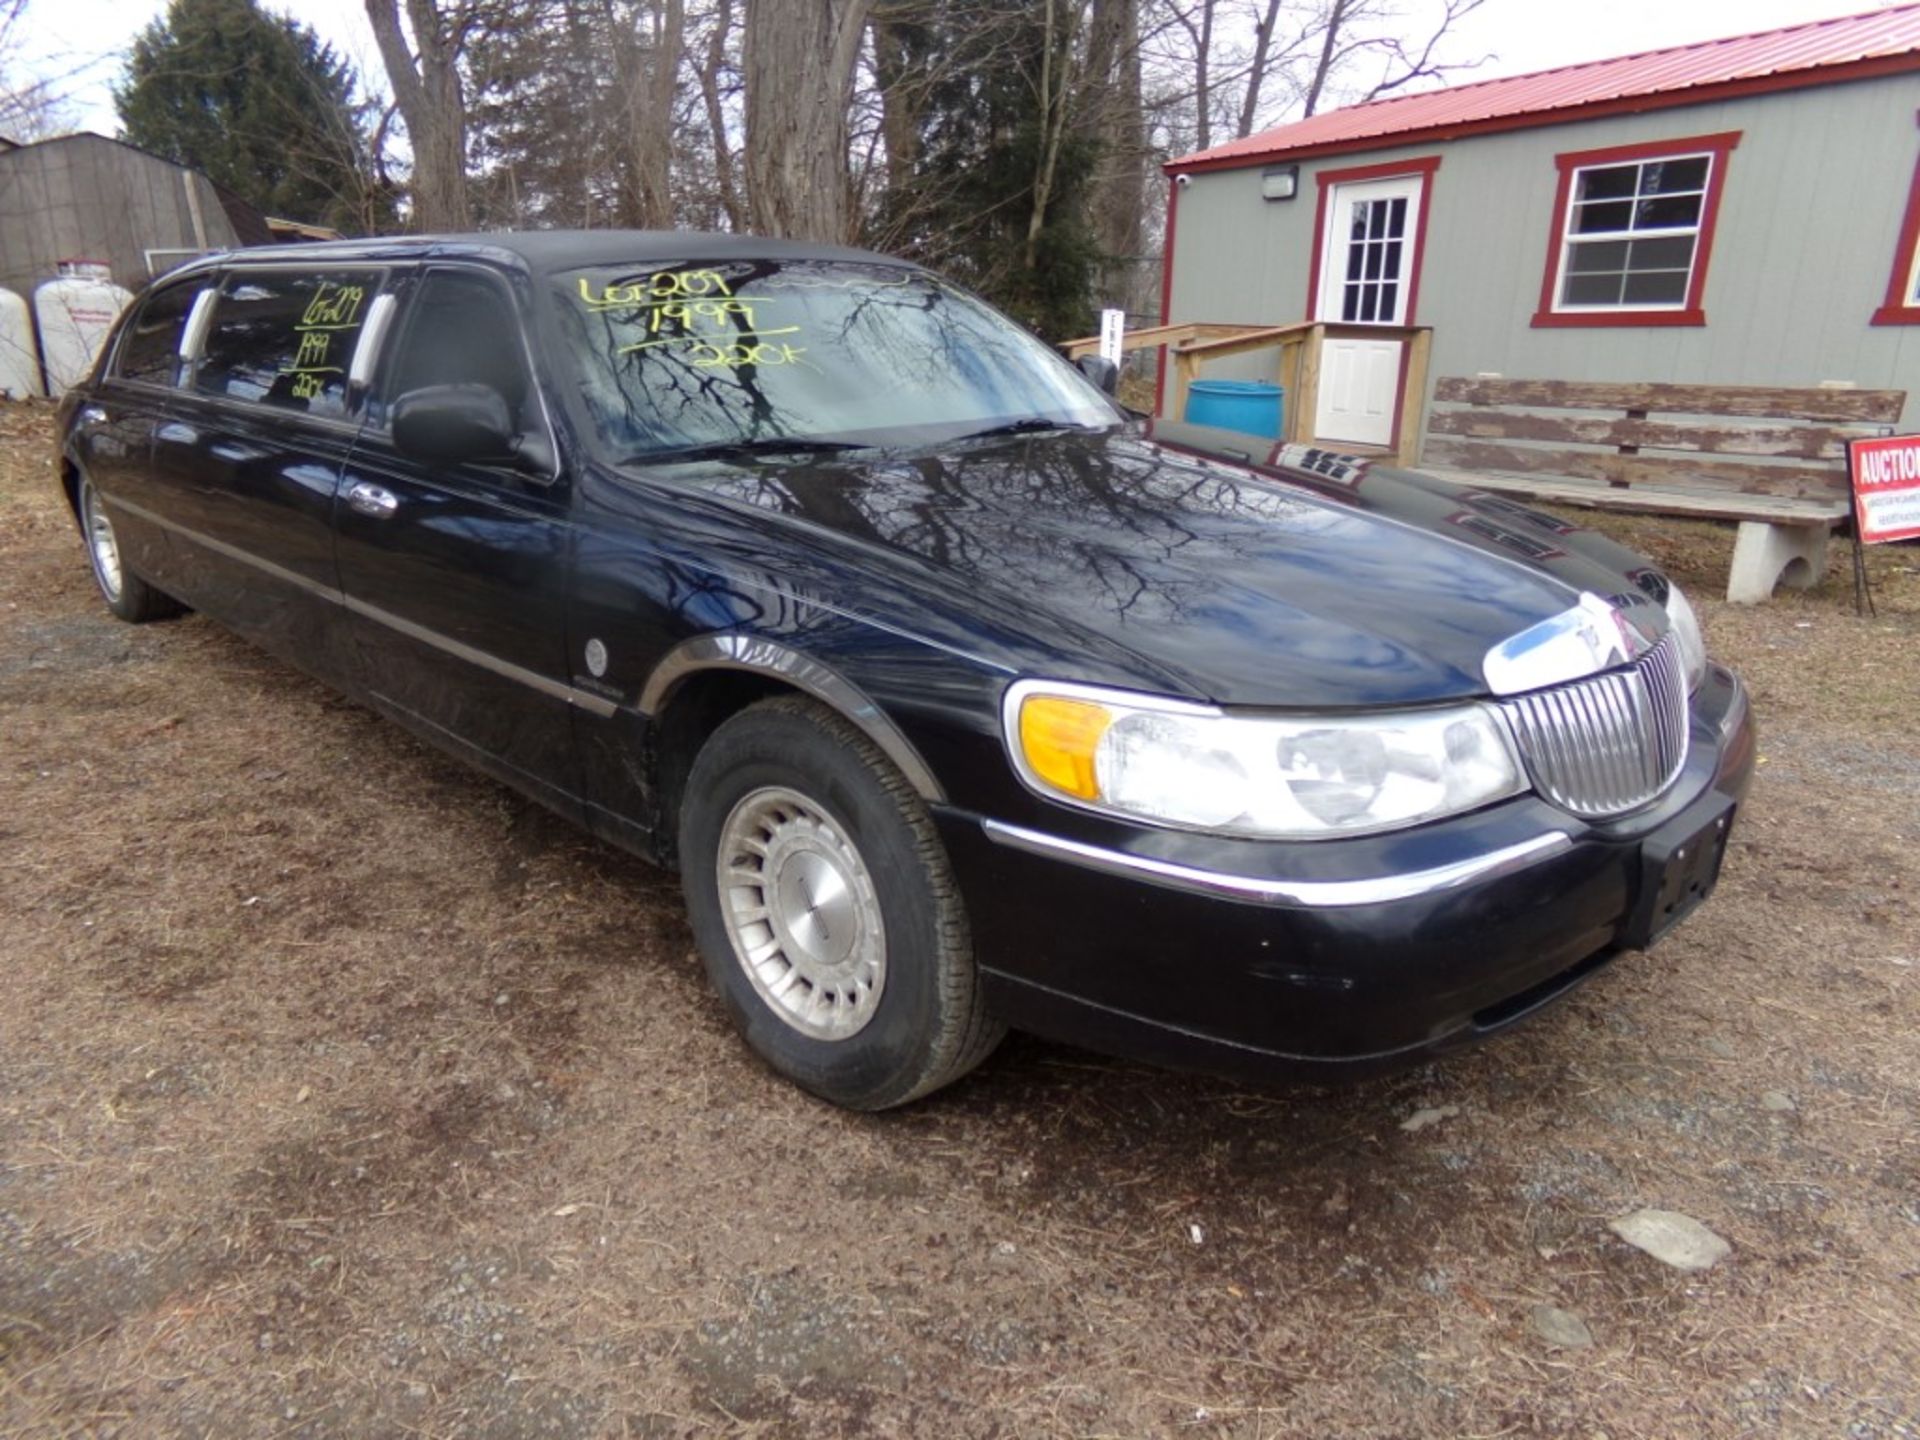 1999 Lincoln Town Car Executive (Limo), Leather, This Vehicle is a Limosine, Black, 220,606 Miles, - Bild 4 aus 8